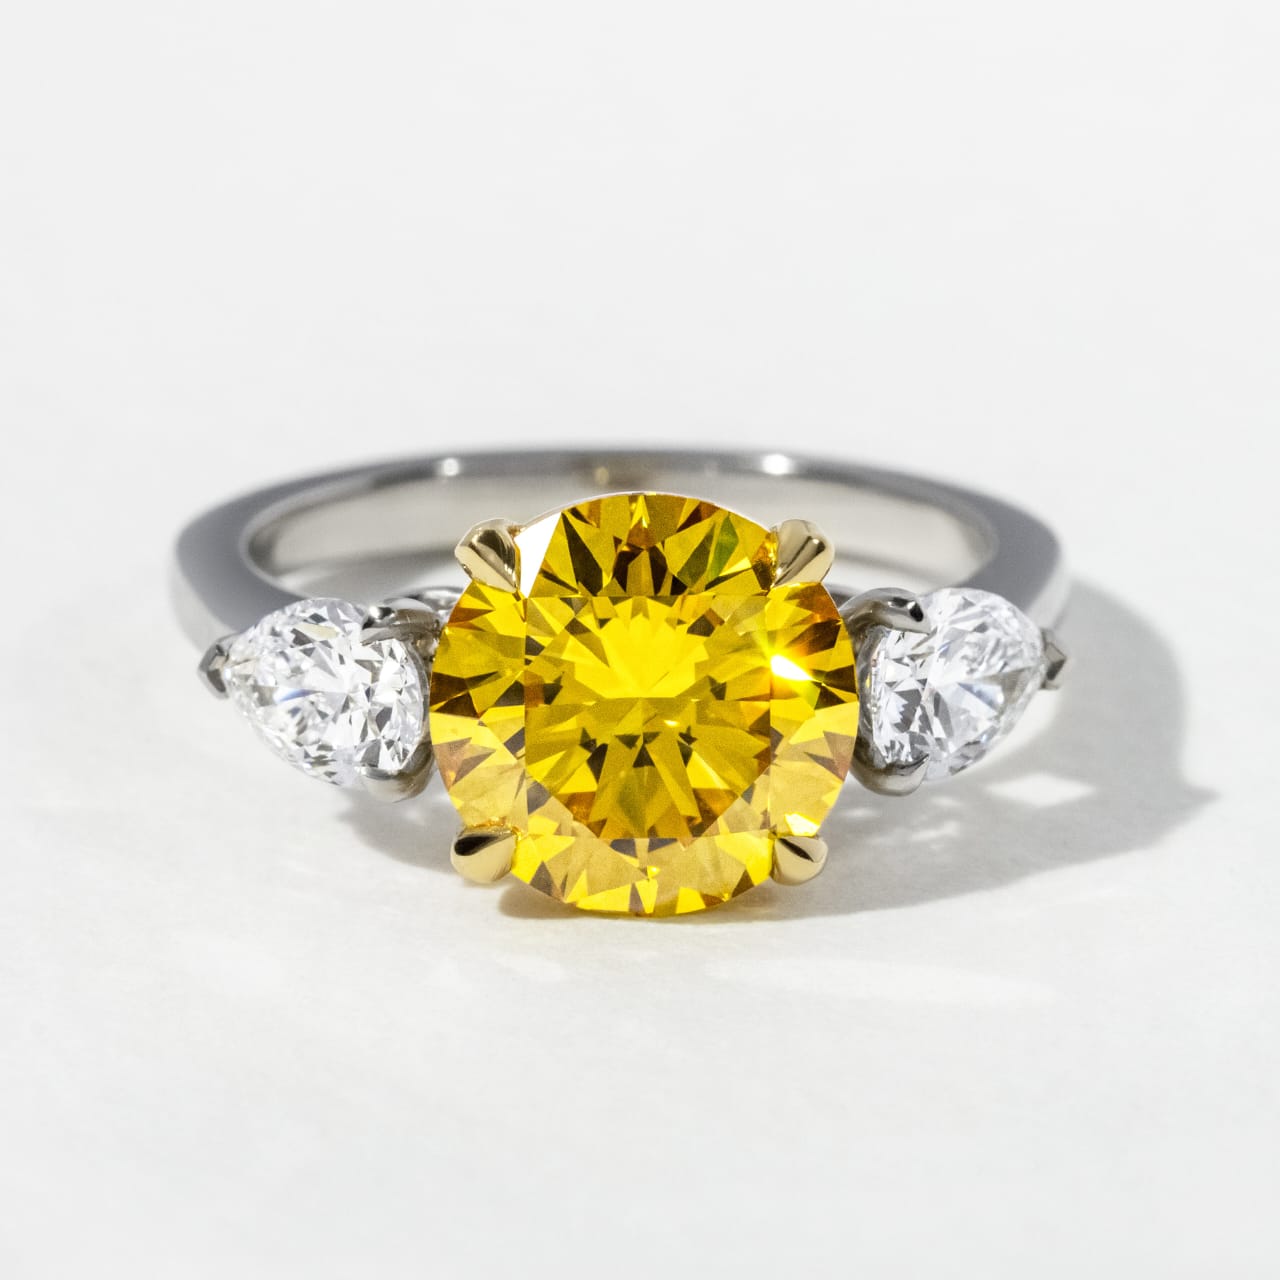 Dreaming of Sparkle? How Does a Yellow Canary Diamond Engagement Ring Measure Up?